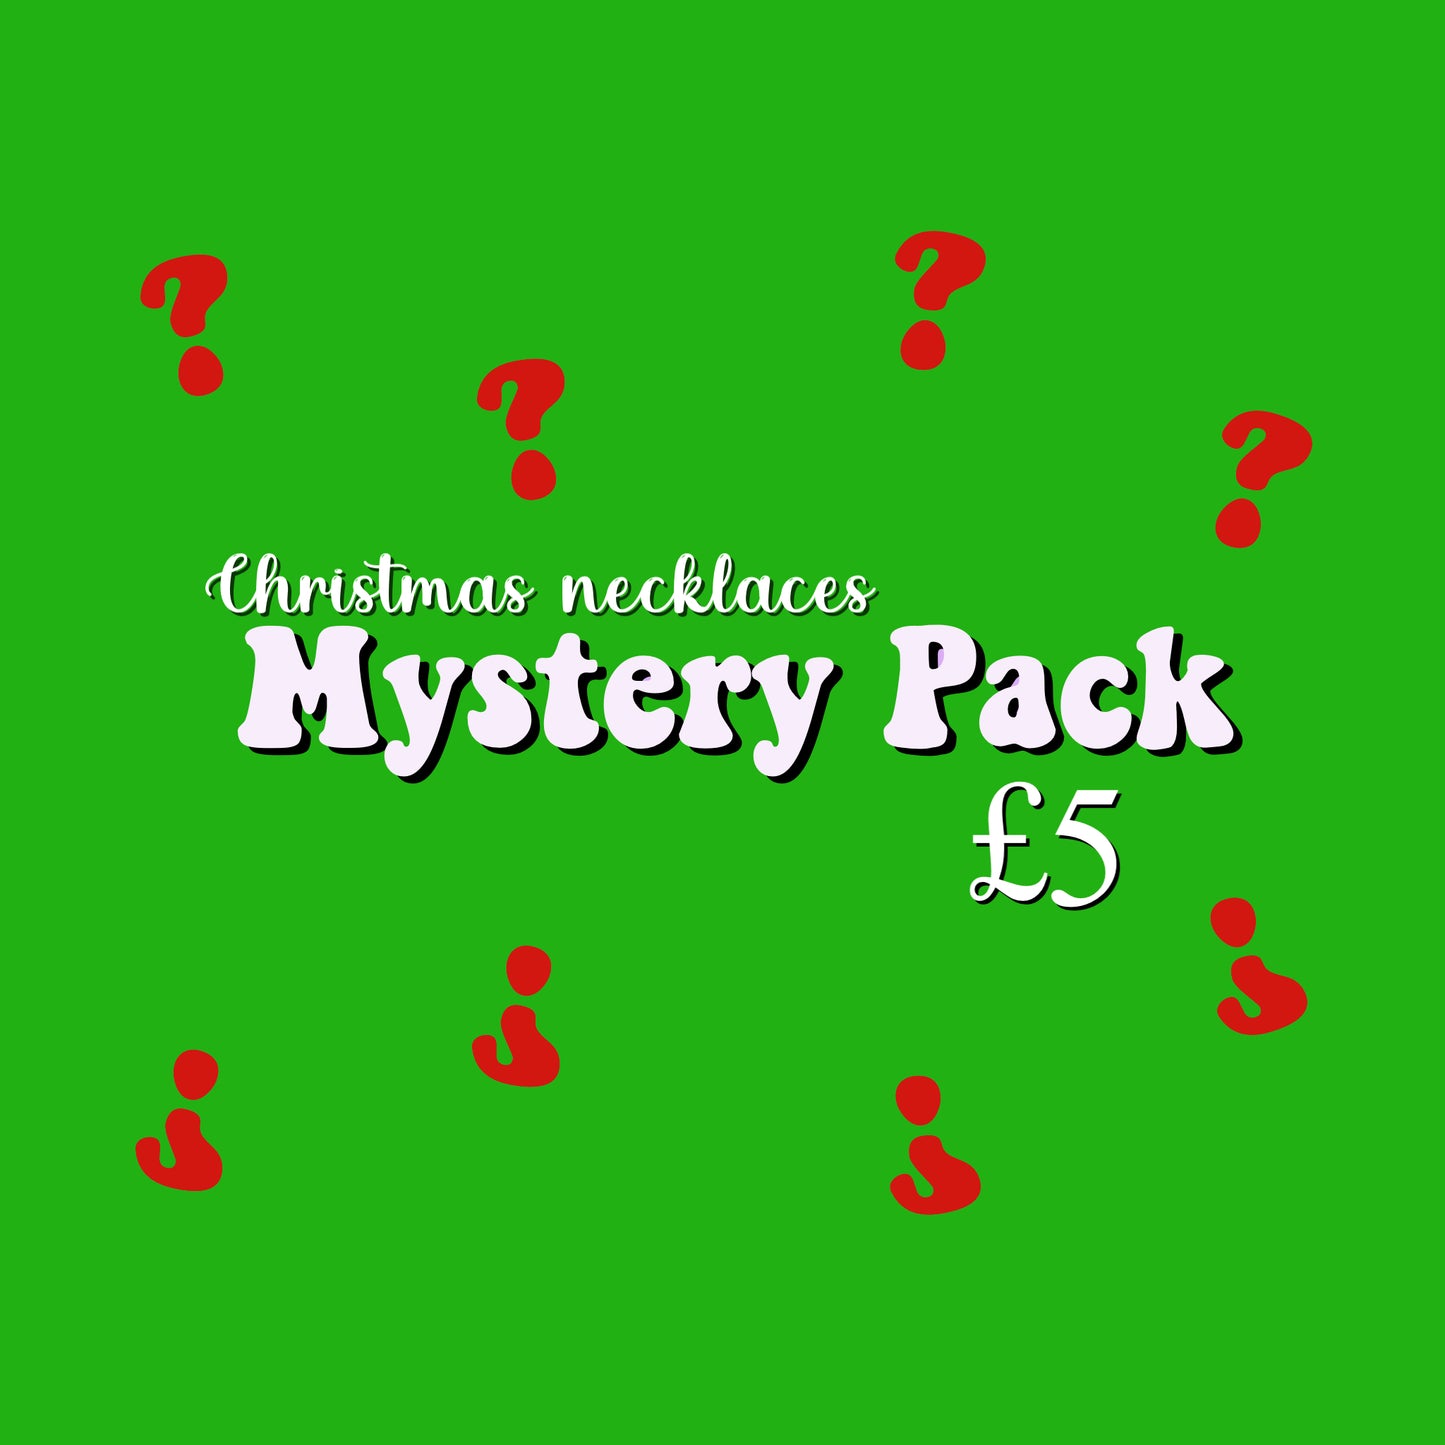 Christmas Necklaces Mystery Pack